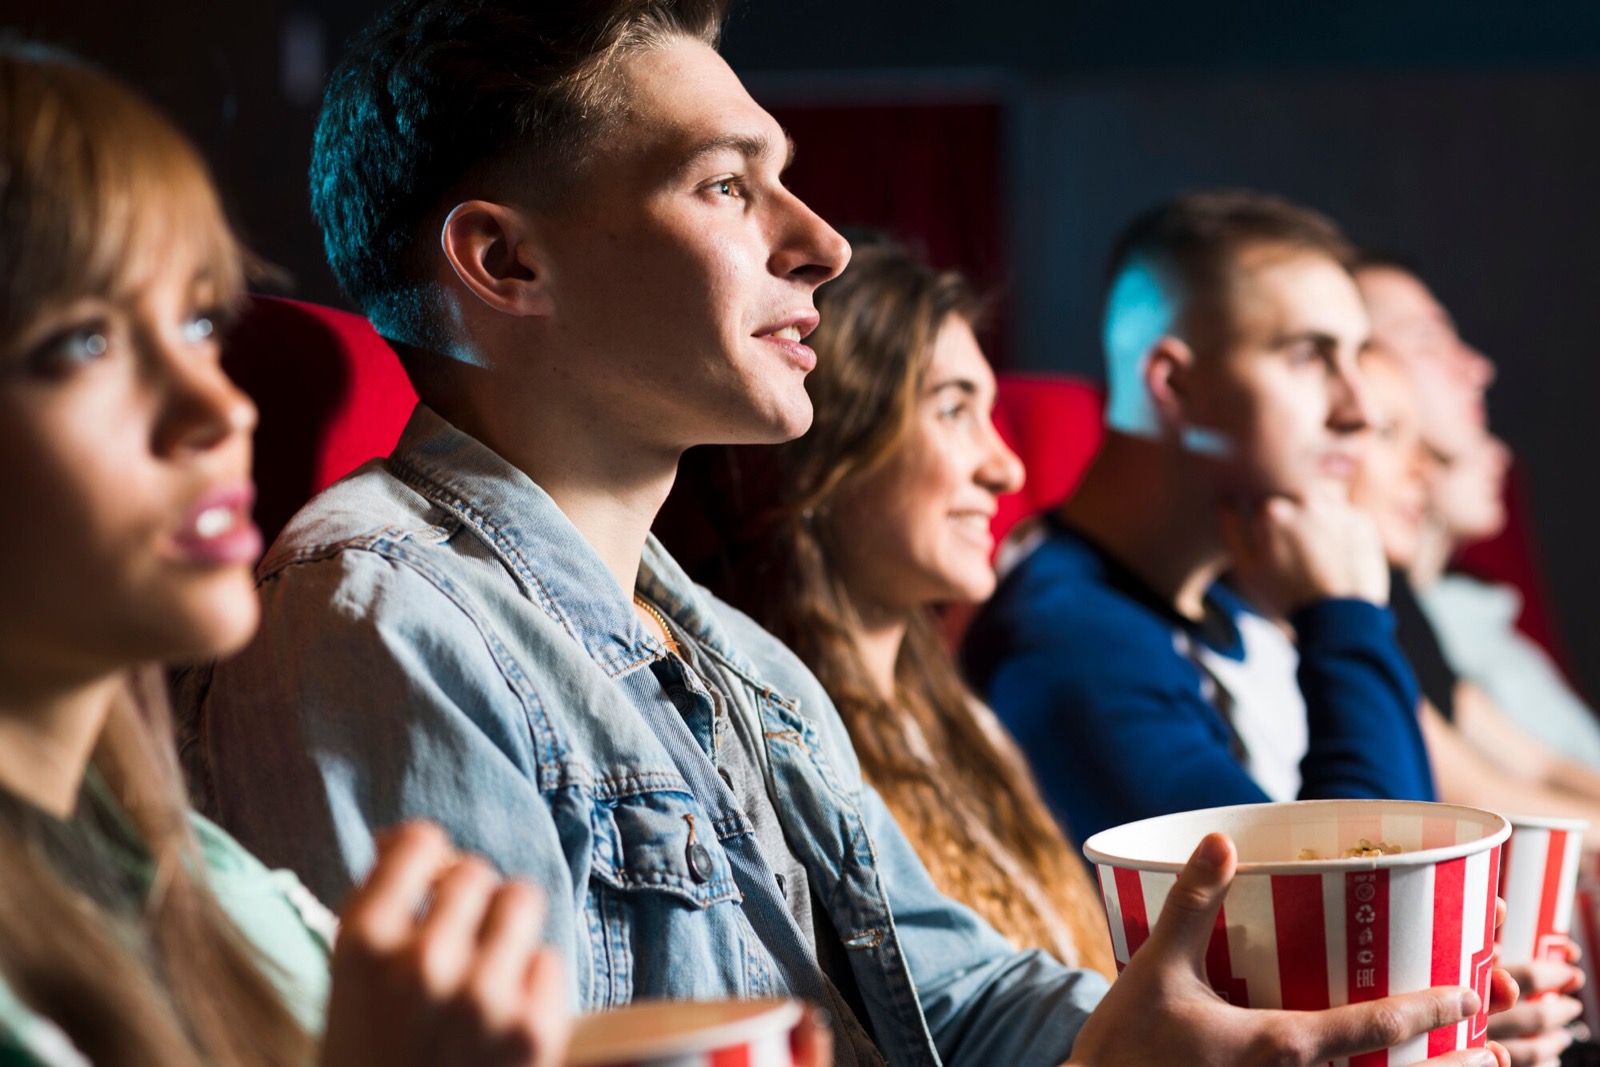 Which Of The Seven Deadly Sins Are You? Watching movie in cinema